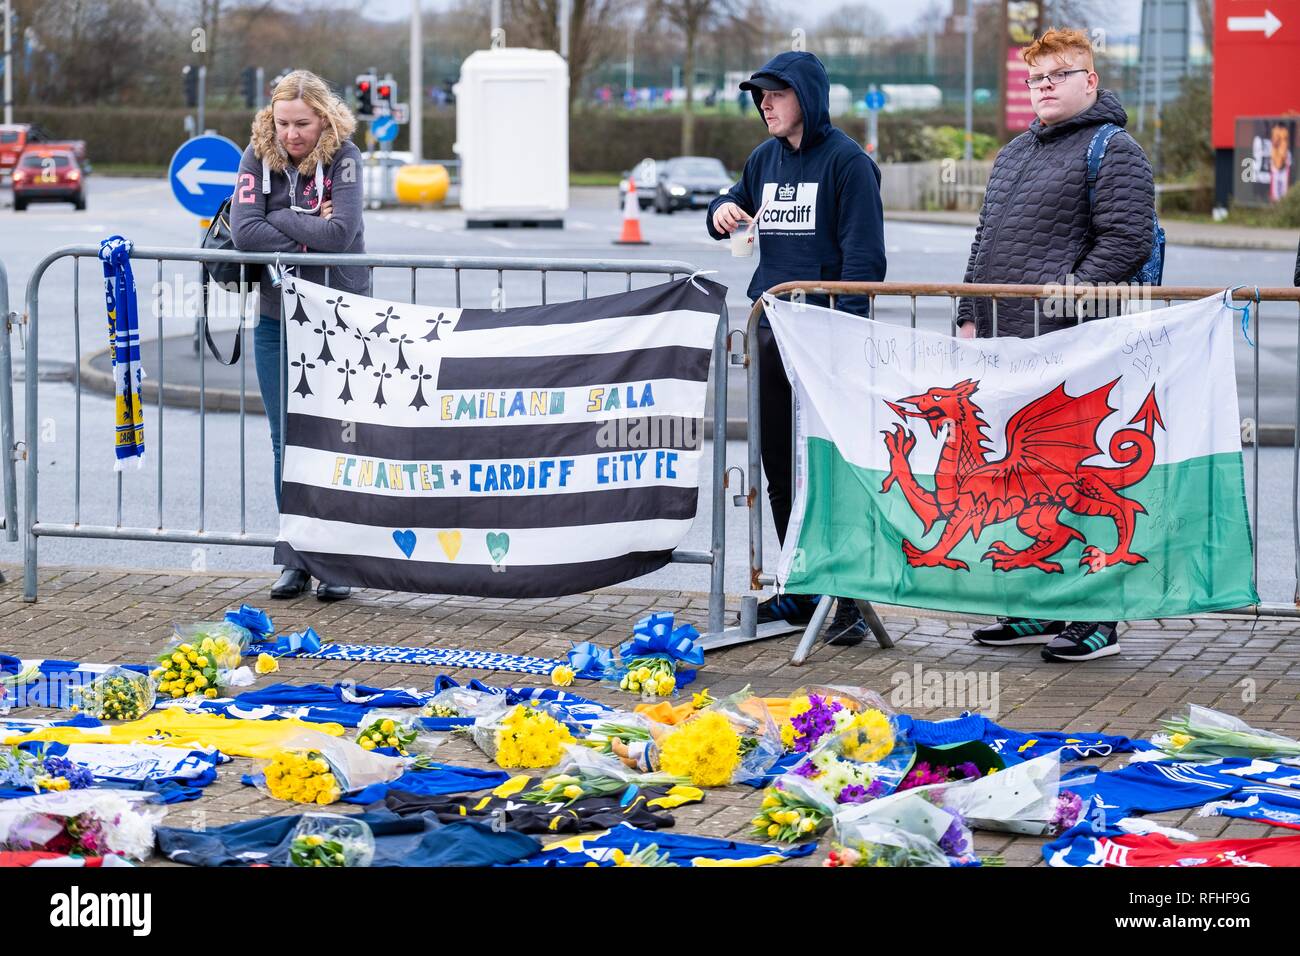 Cardiff, Wales, UK. 26th January 2019.  Tributes are being left by members of the public to footballer Emiliano Sala outside Cardiff City Football stadium on Saturday, January 26, 2019, following the disappearance of an aircraft over the English Channel earlier this week which Sala was on board. Credit: Christopher Middleton/Alamy Live News Stock Photo